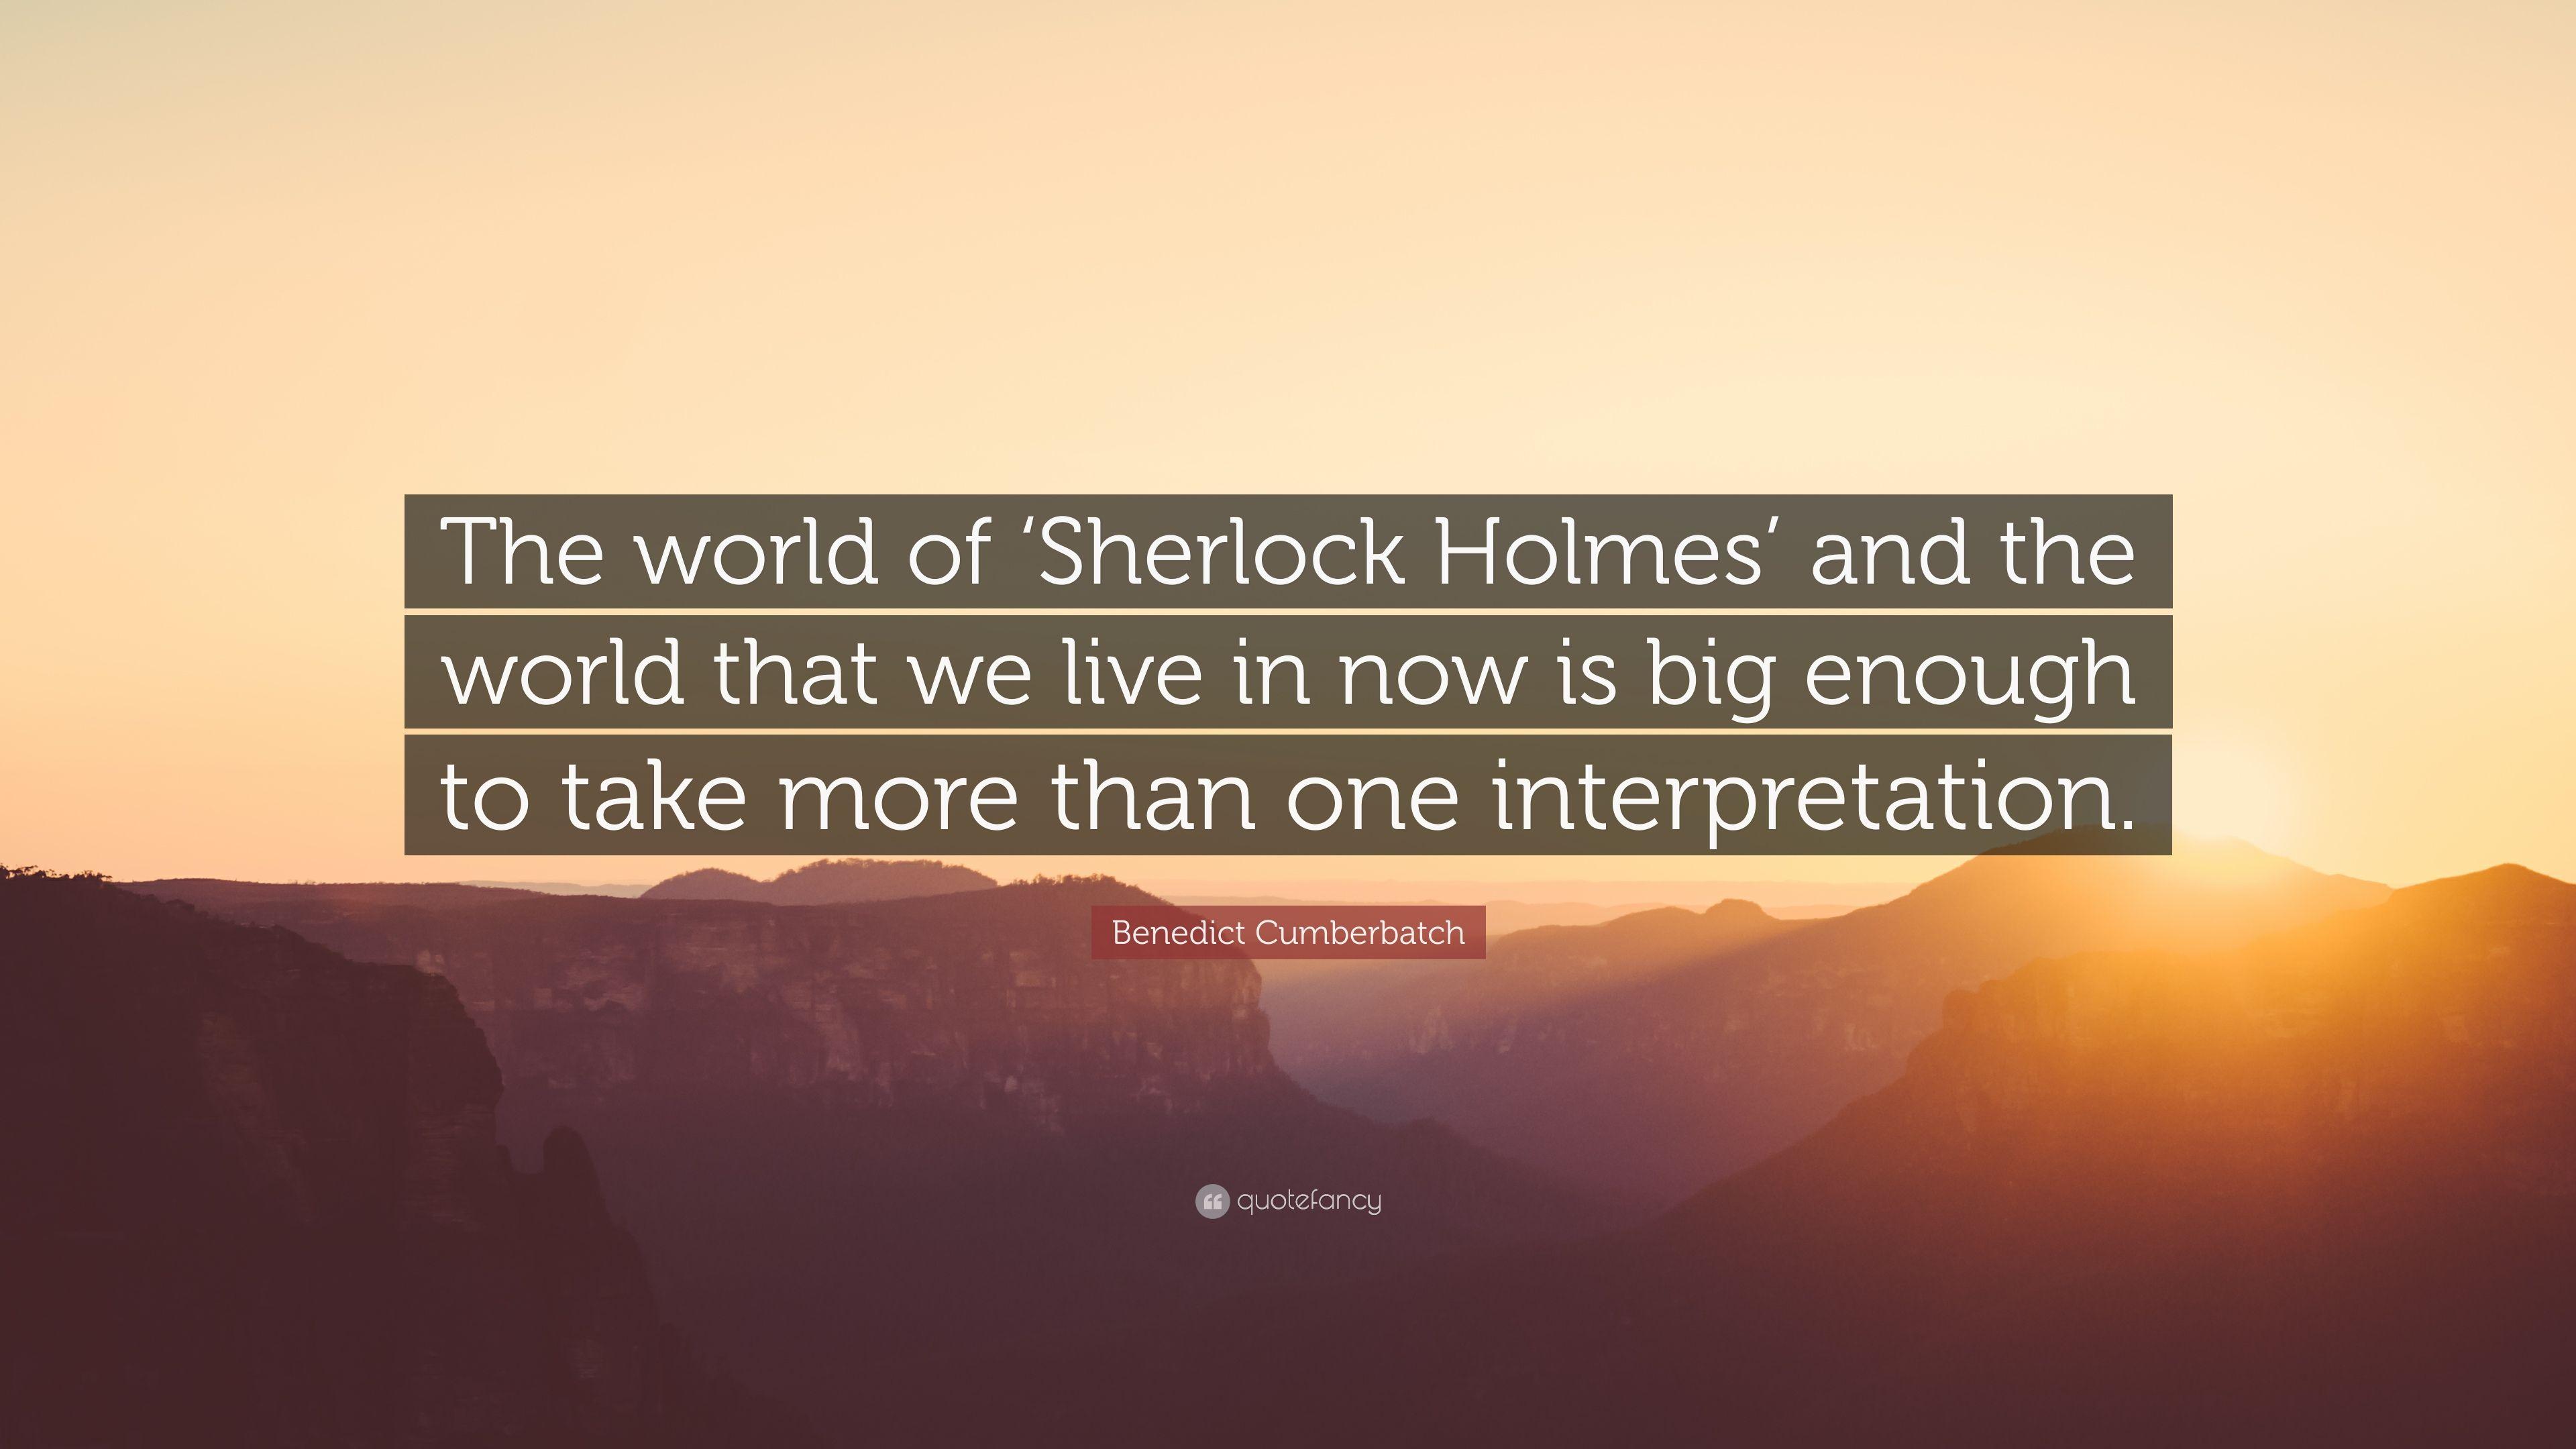 Benedict Cumberbatch Quote: “The world of 'Sherlock Holmes' and